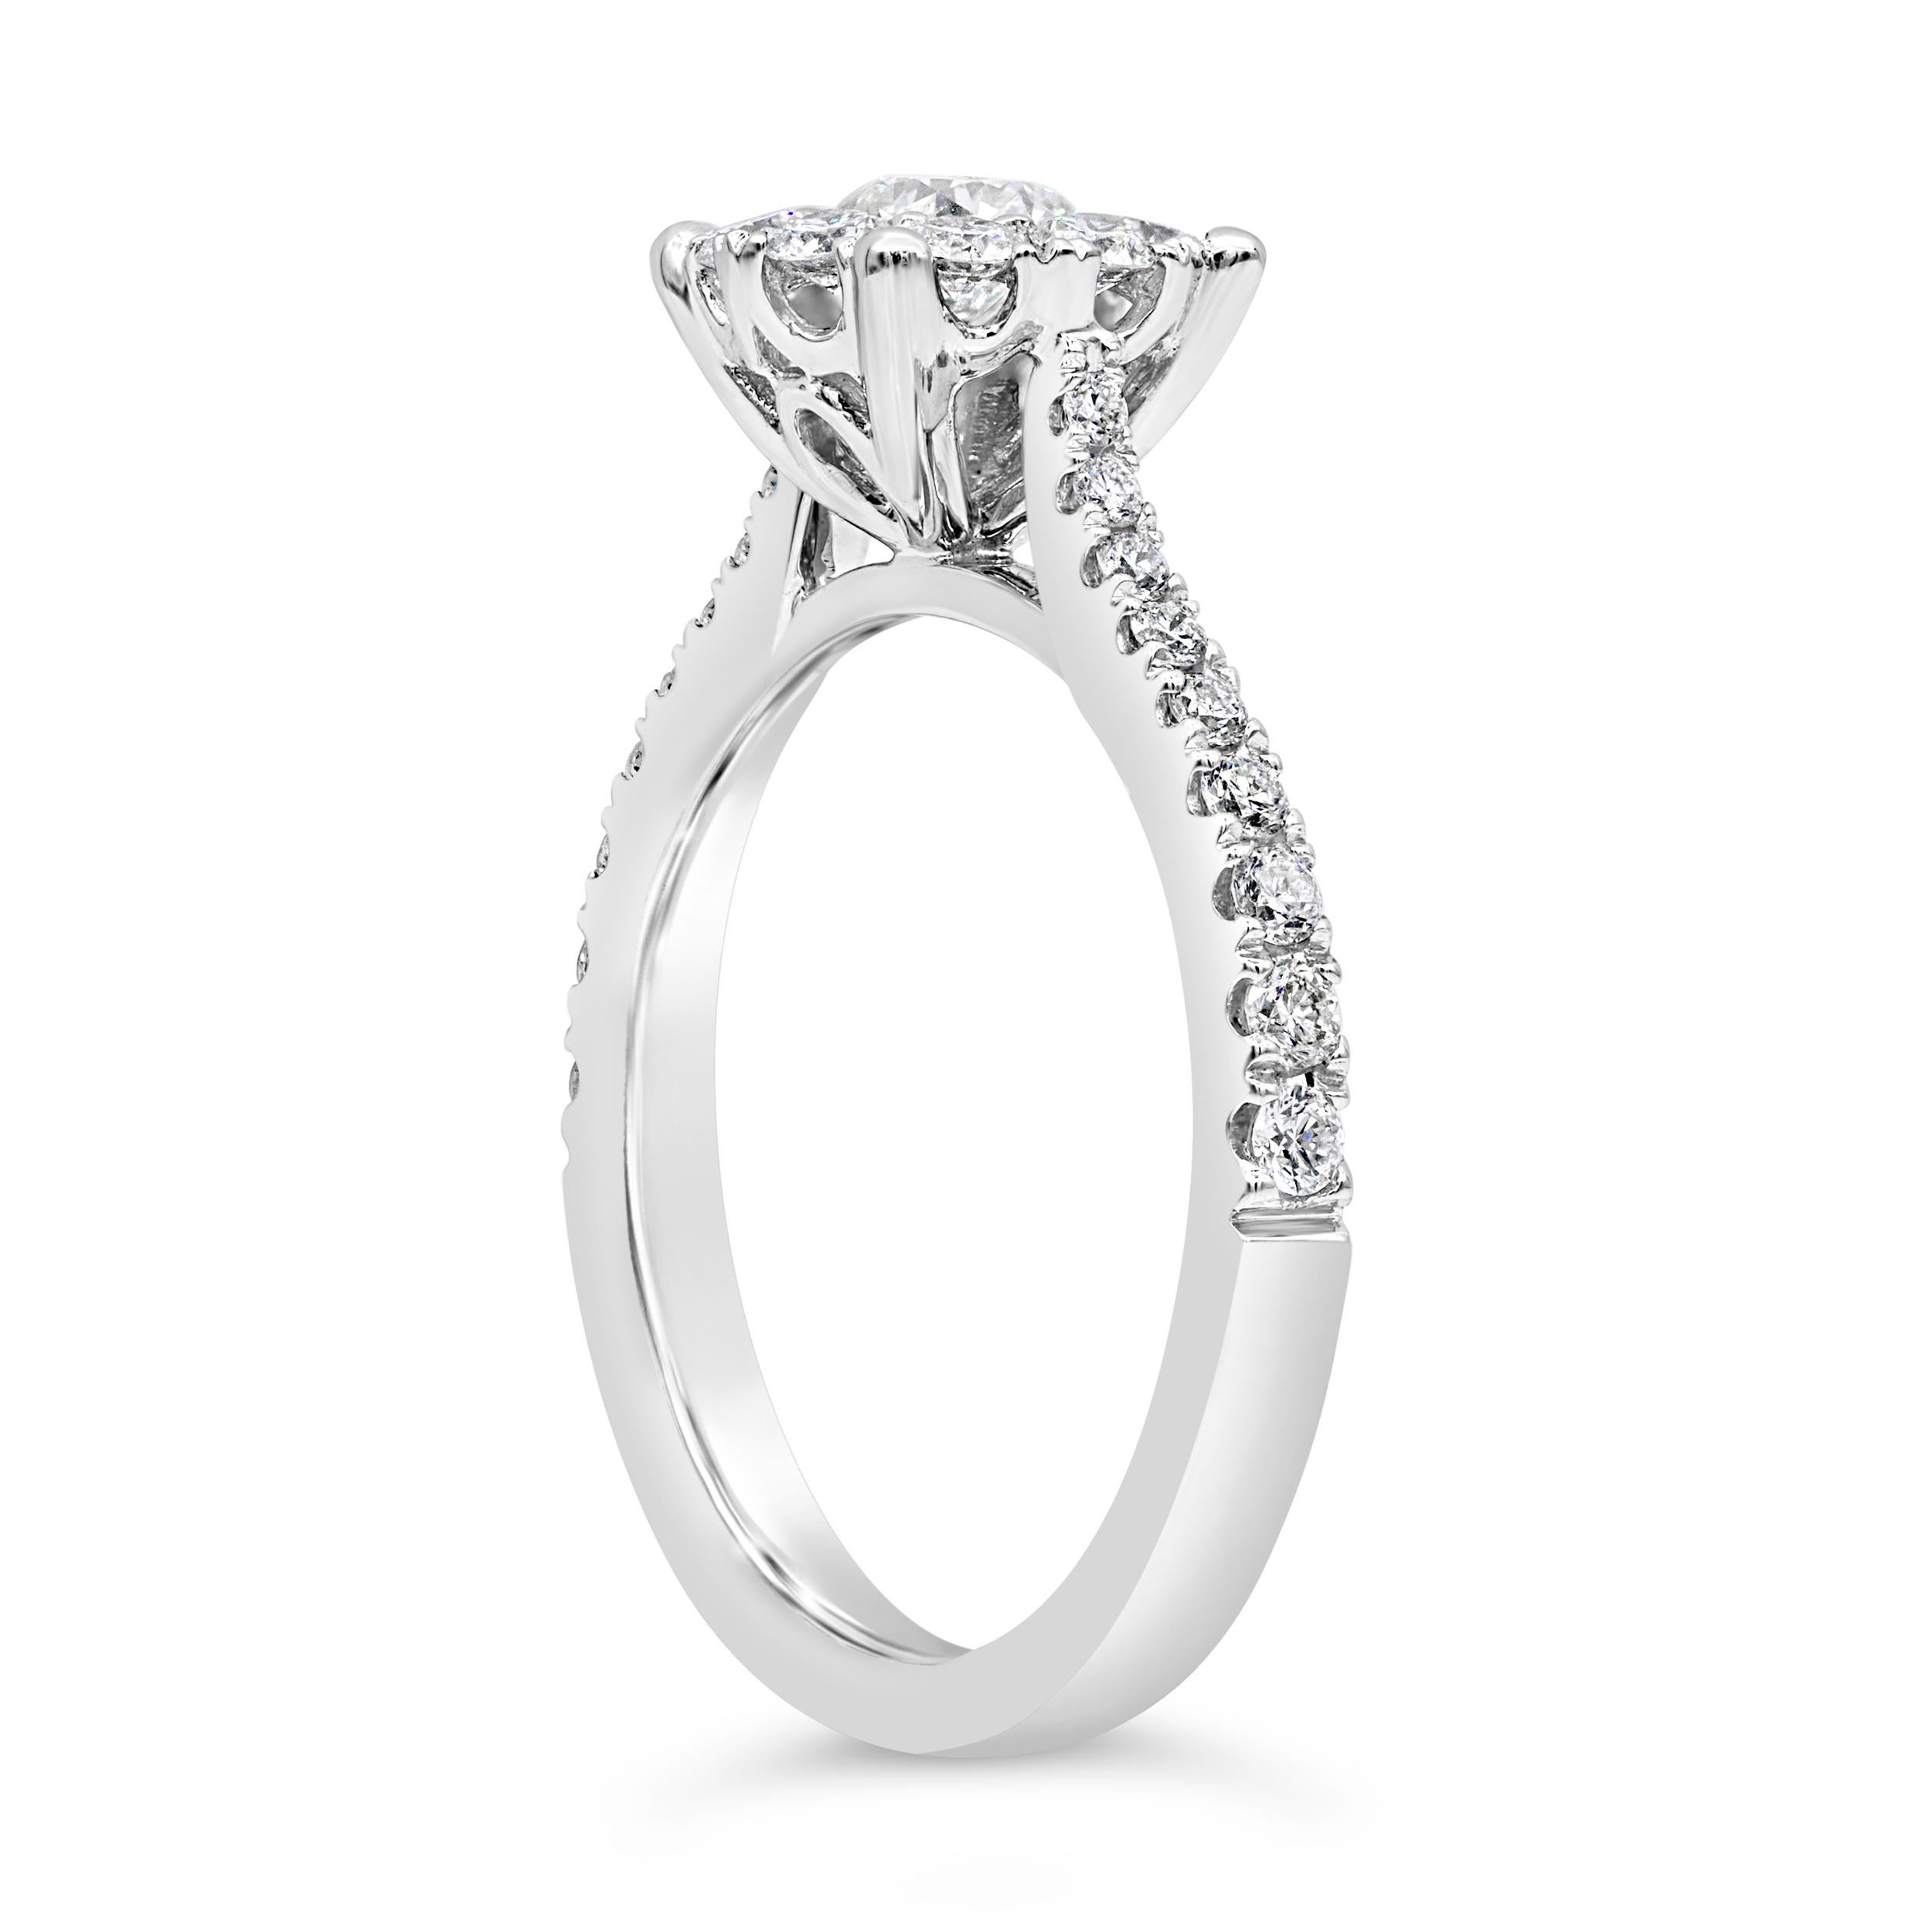 A unique engagement ring style showcasing a cluster of round brilliant diamonds to make it look like one large center diamond! Set on an 18 karat white gold mounting accented with diamonds. Diamonds weigh 0.93 carats total. Size 6.5 US, resizable